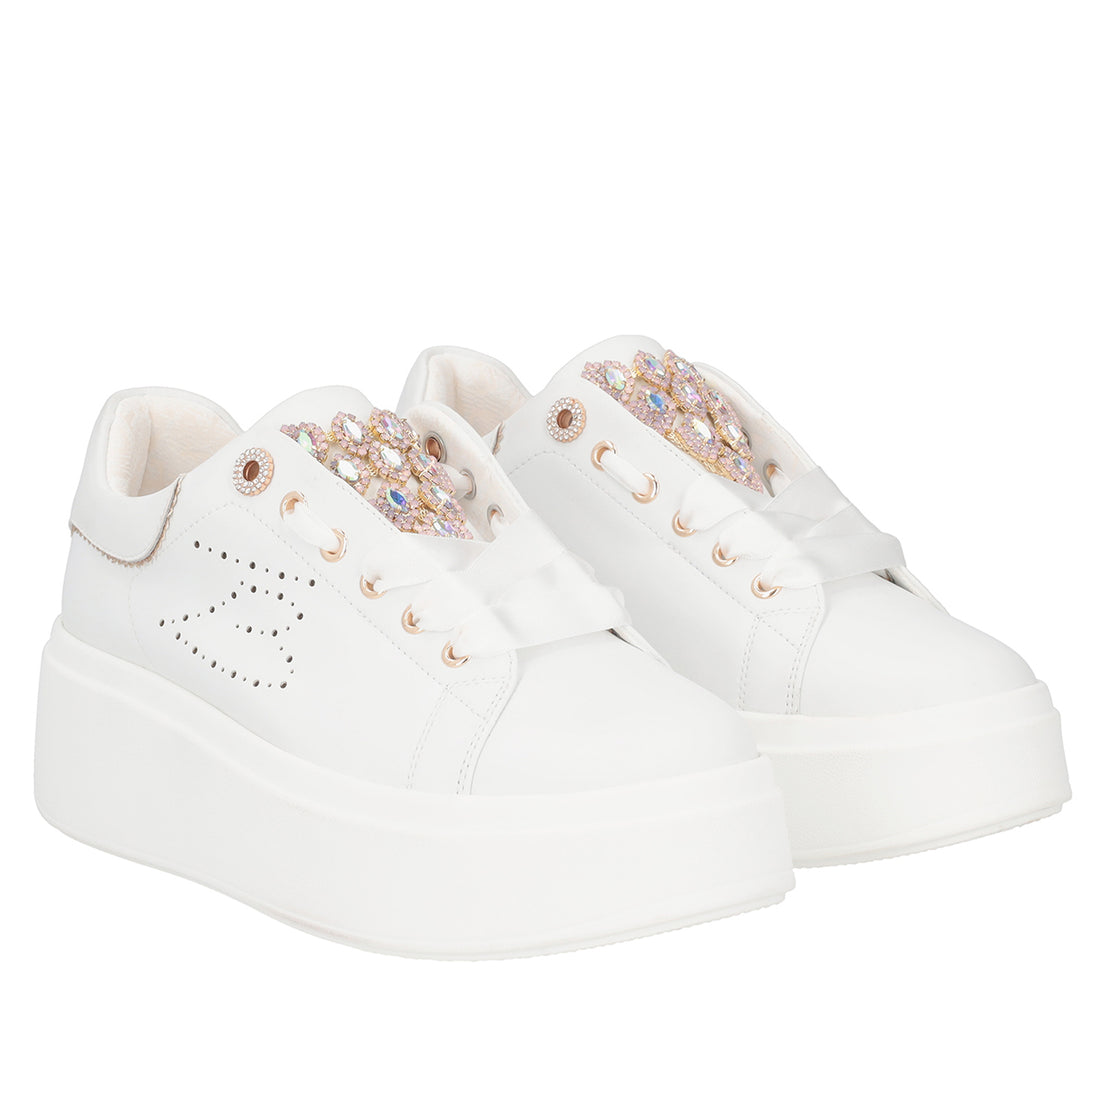 WHITE VANITY SNEAKER IN LEATHER WITH JEWEL ACCESSORY